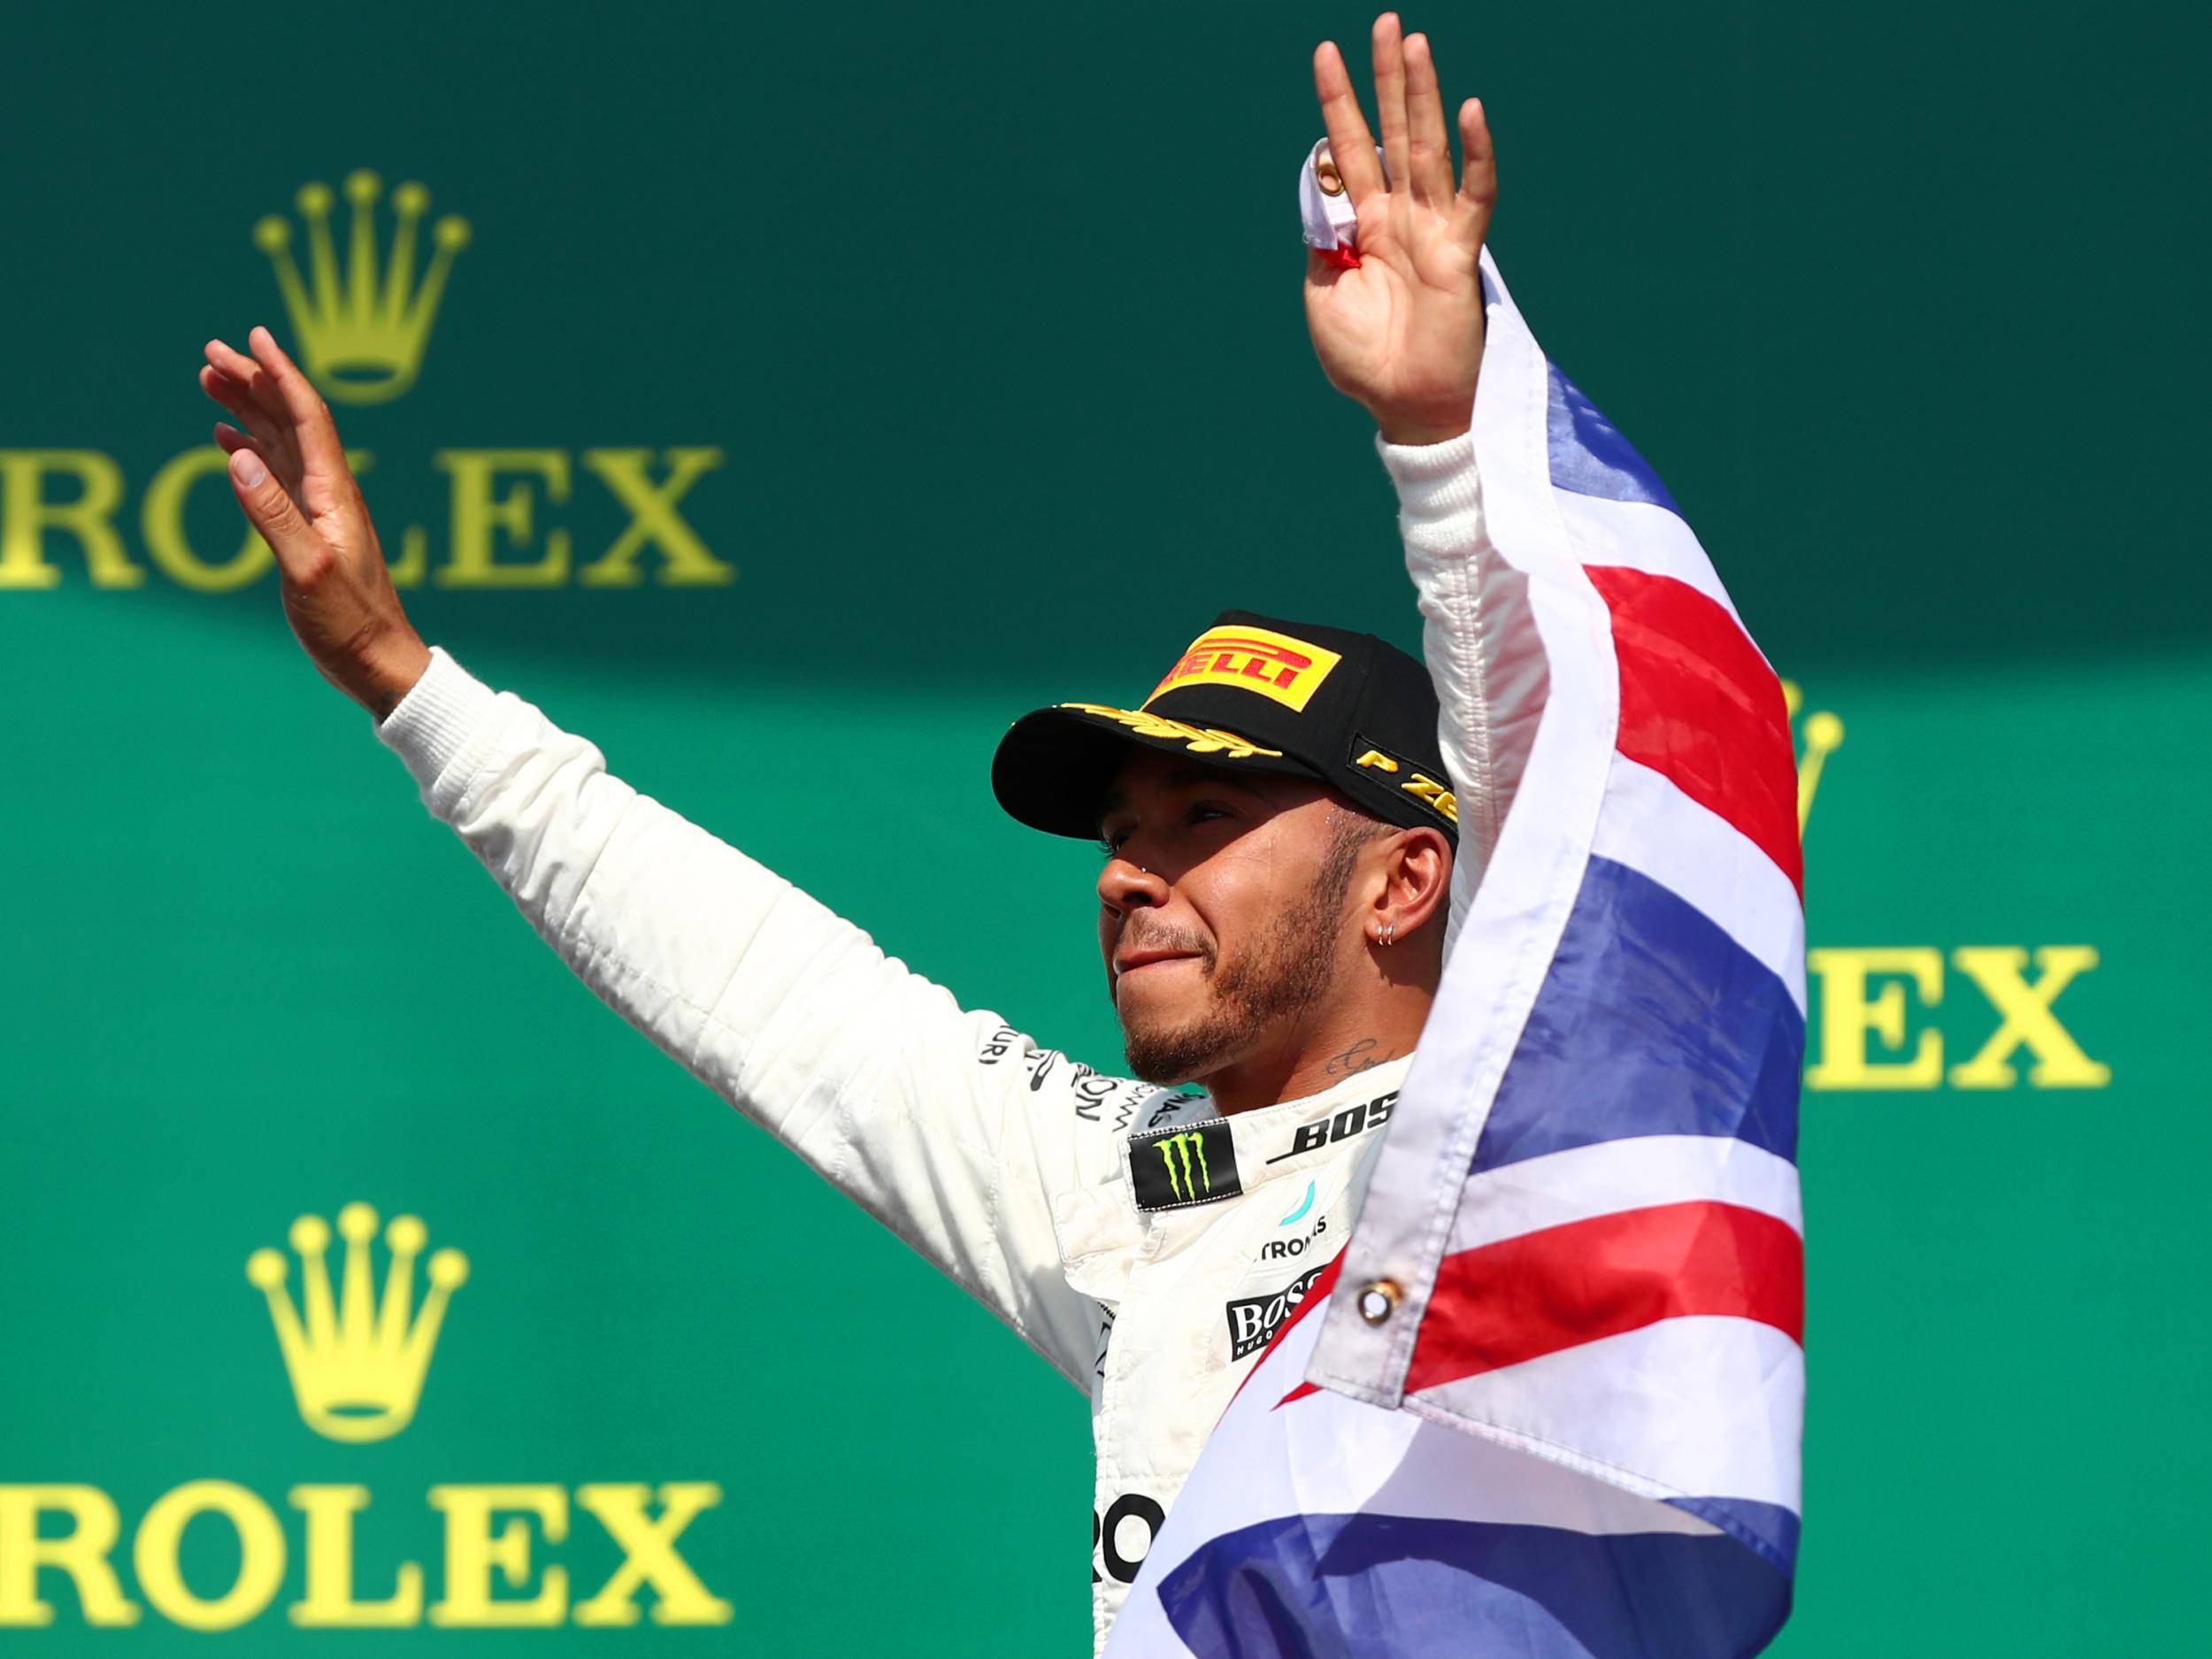 Hamilton clawed back some World Championship points in Montreal